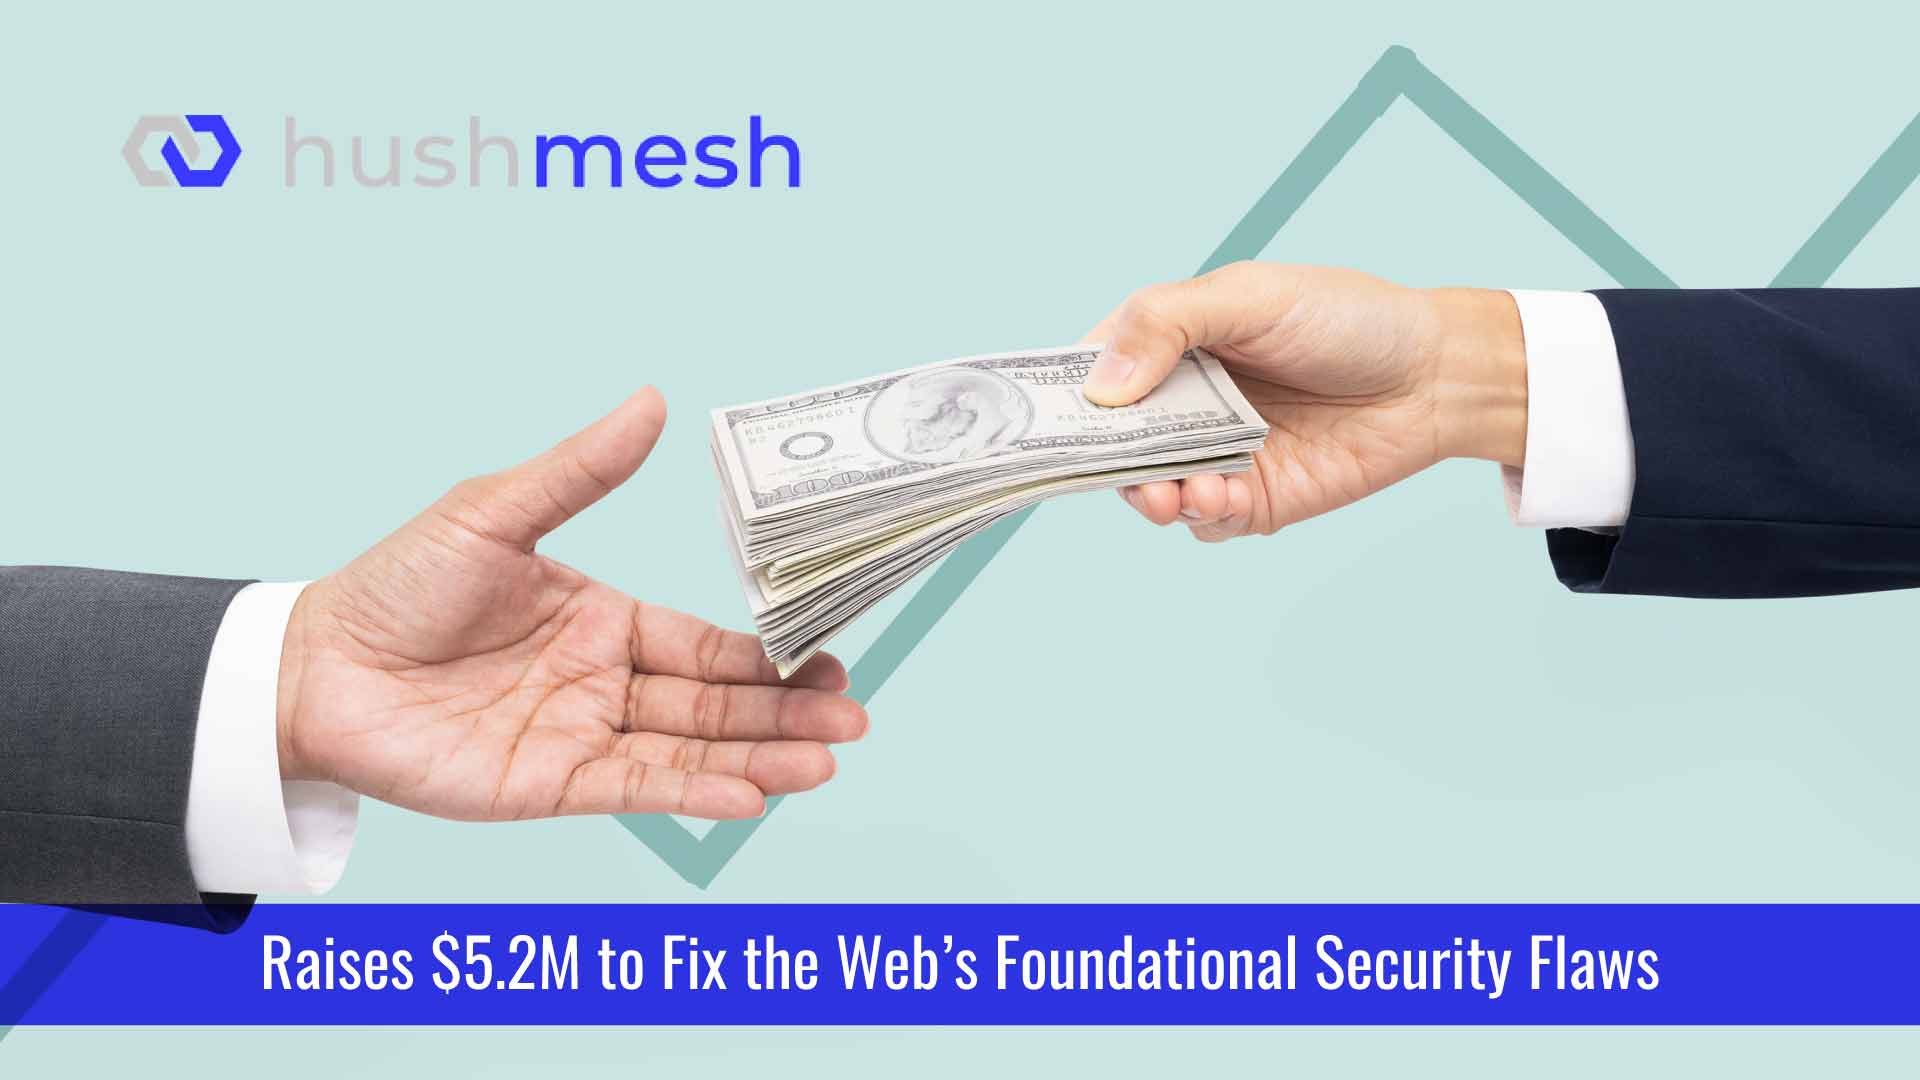 Hushmesh Raises $5.2M to Fix the Web’s Foundational Security Flaws